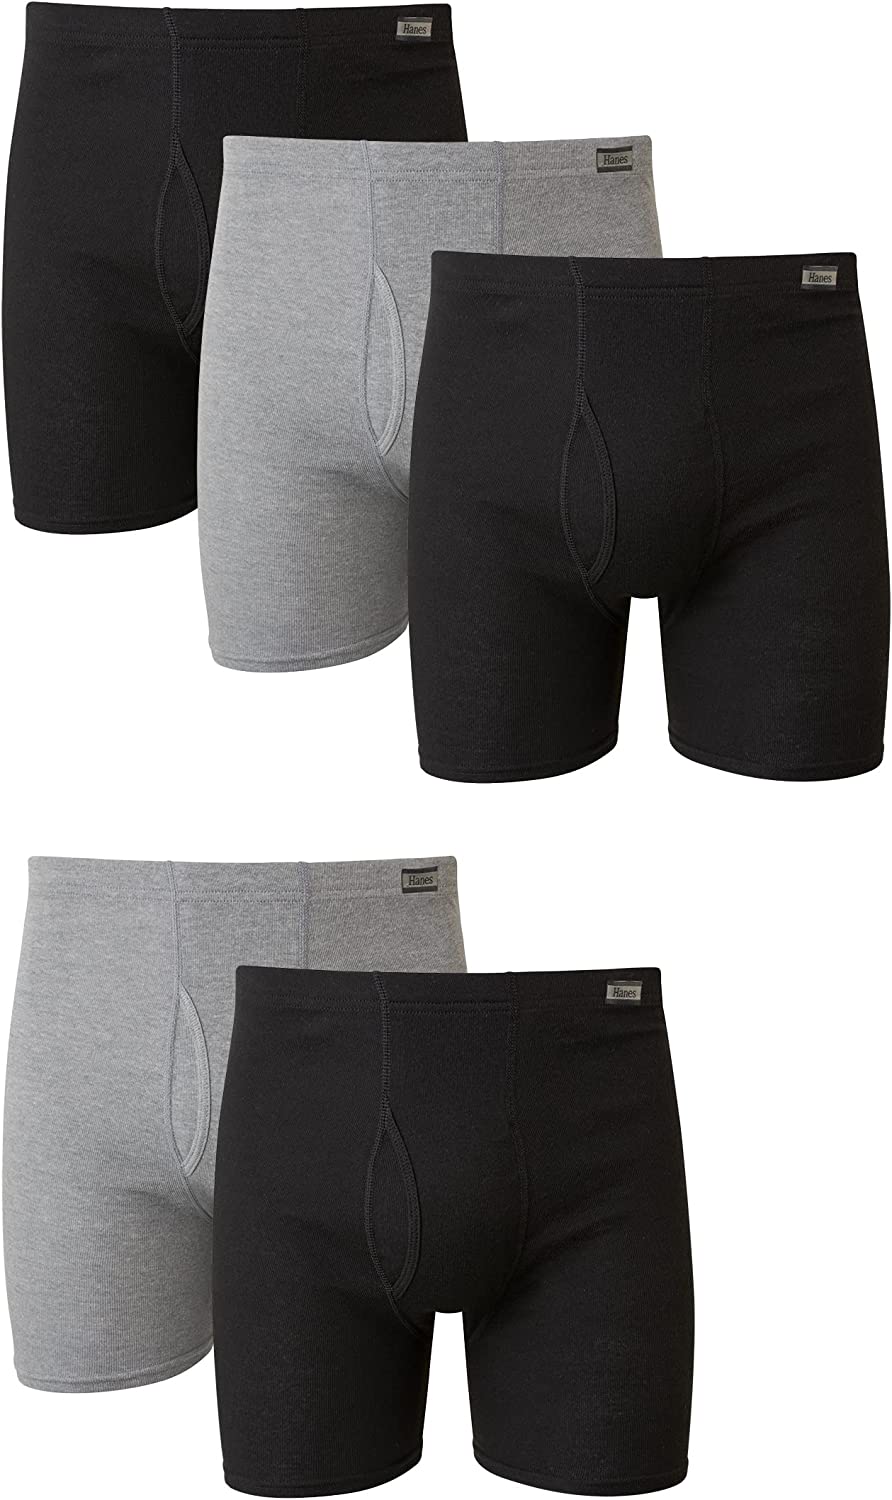 Men's Tagless Comfort Soft Boxer Briefs with Covered Waistband-Multiple Packs Available